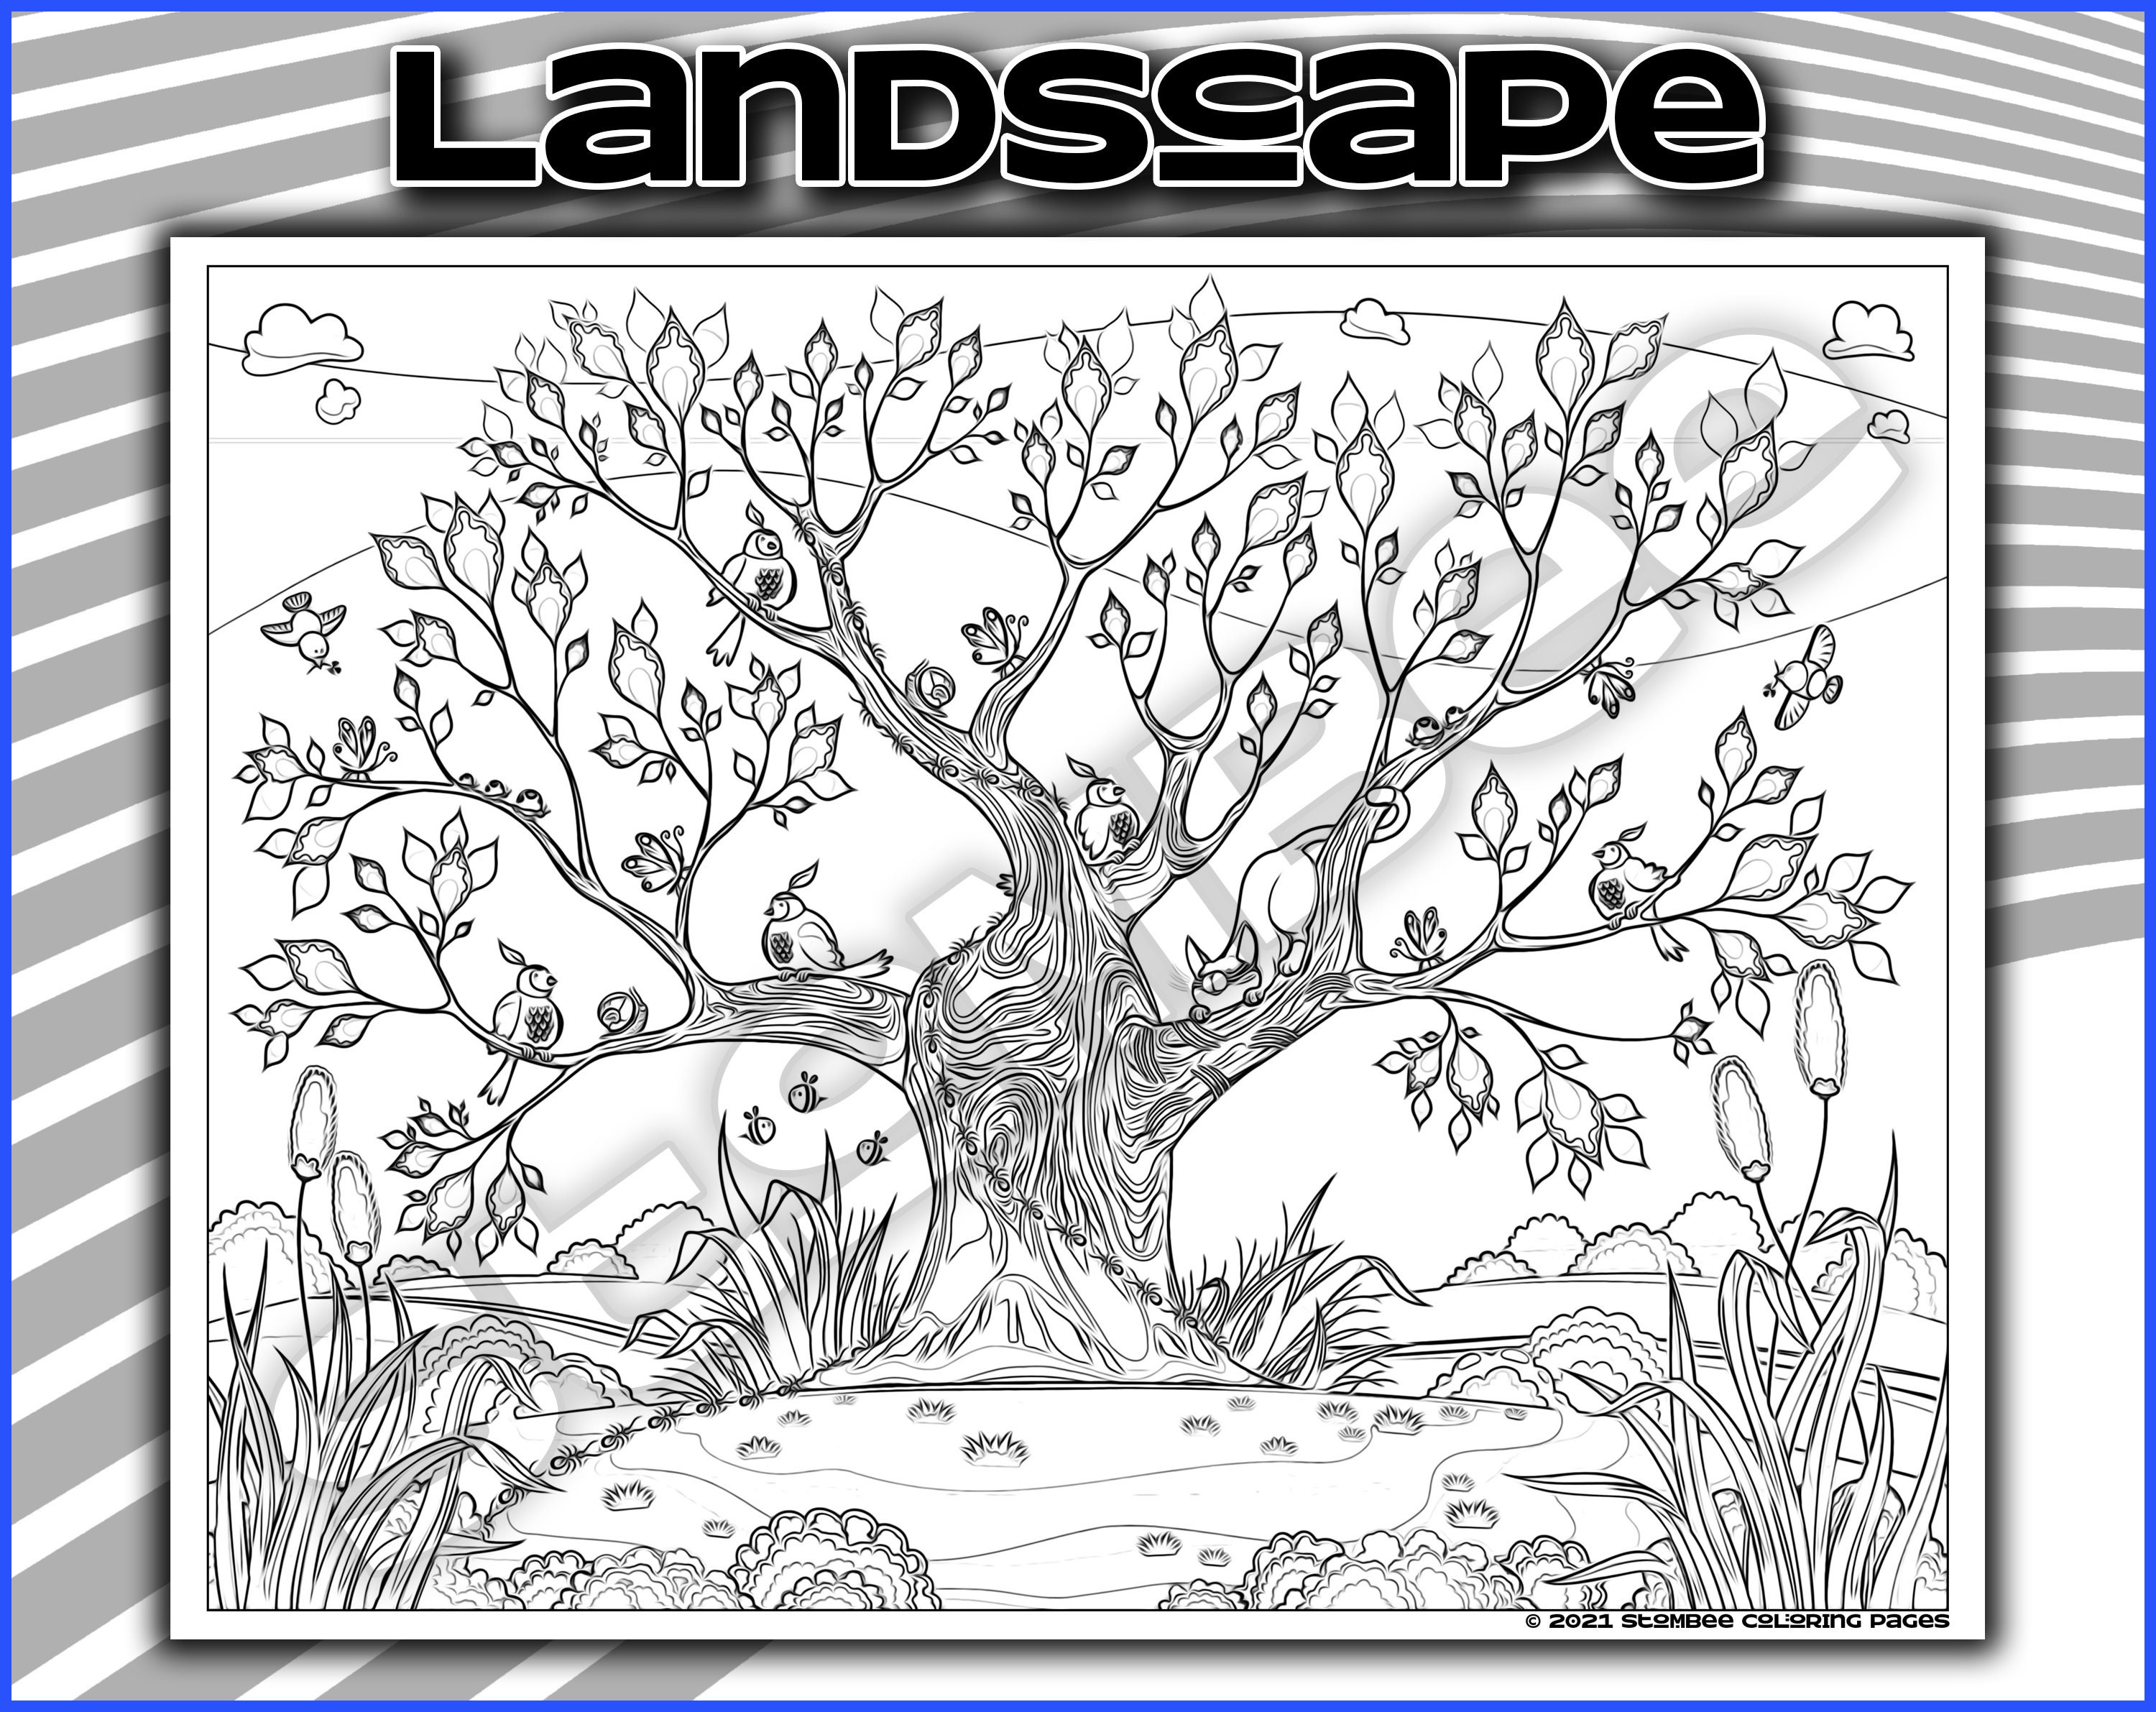  Elfew 2 Pack Landscape Coloring Book for Adult,Adult Coloring  Book Spiral Bound,80 Landscape Coloring Pages Designs of Natural  Landscape,Animal,Building,Adult Coloring Books for Anxiety and Depression :  Arts, Crafts & Sewing